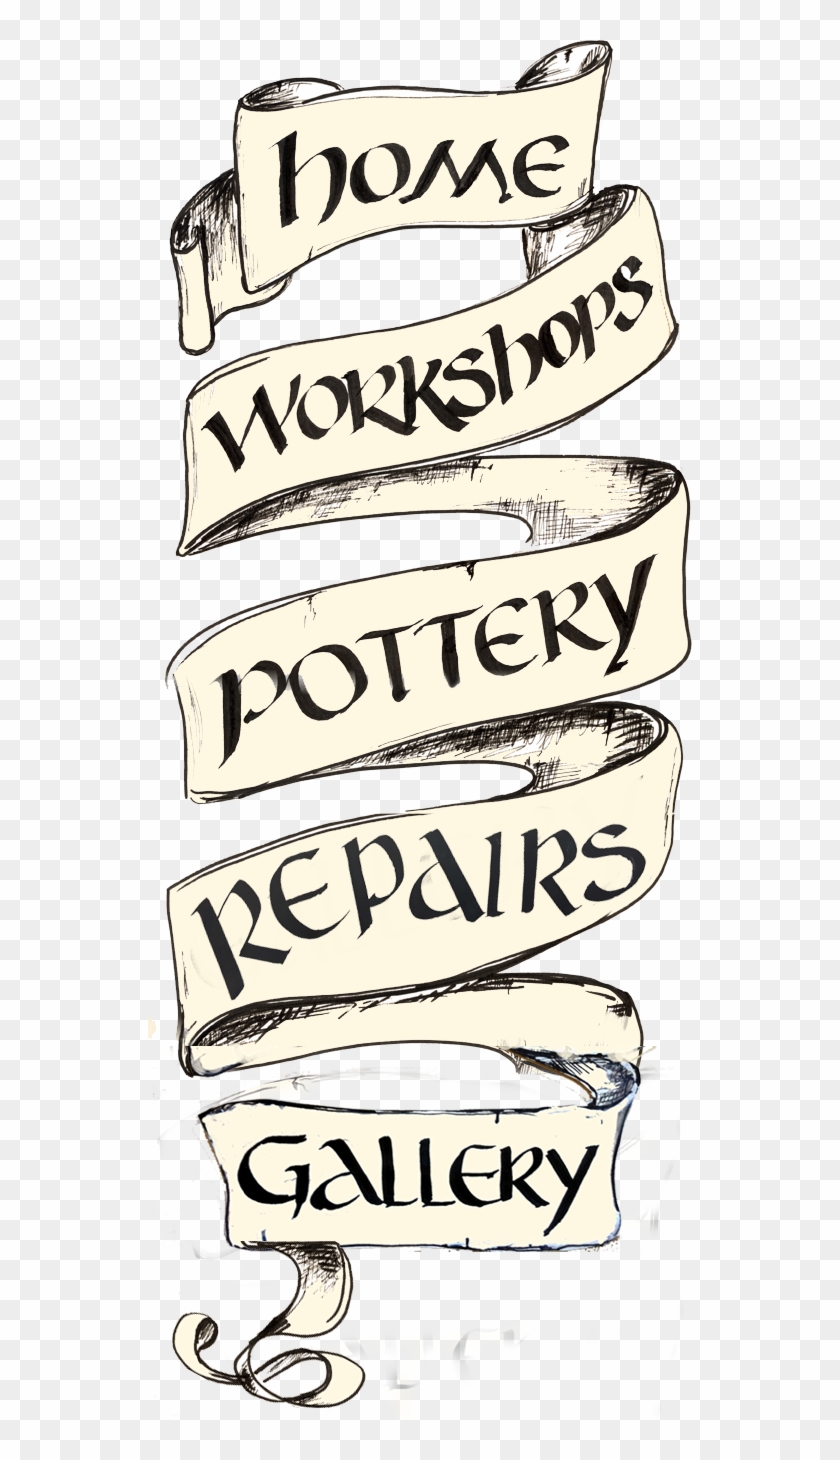 New Pottery Workshop Dates And Information - Calligraphy #219163